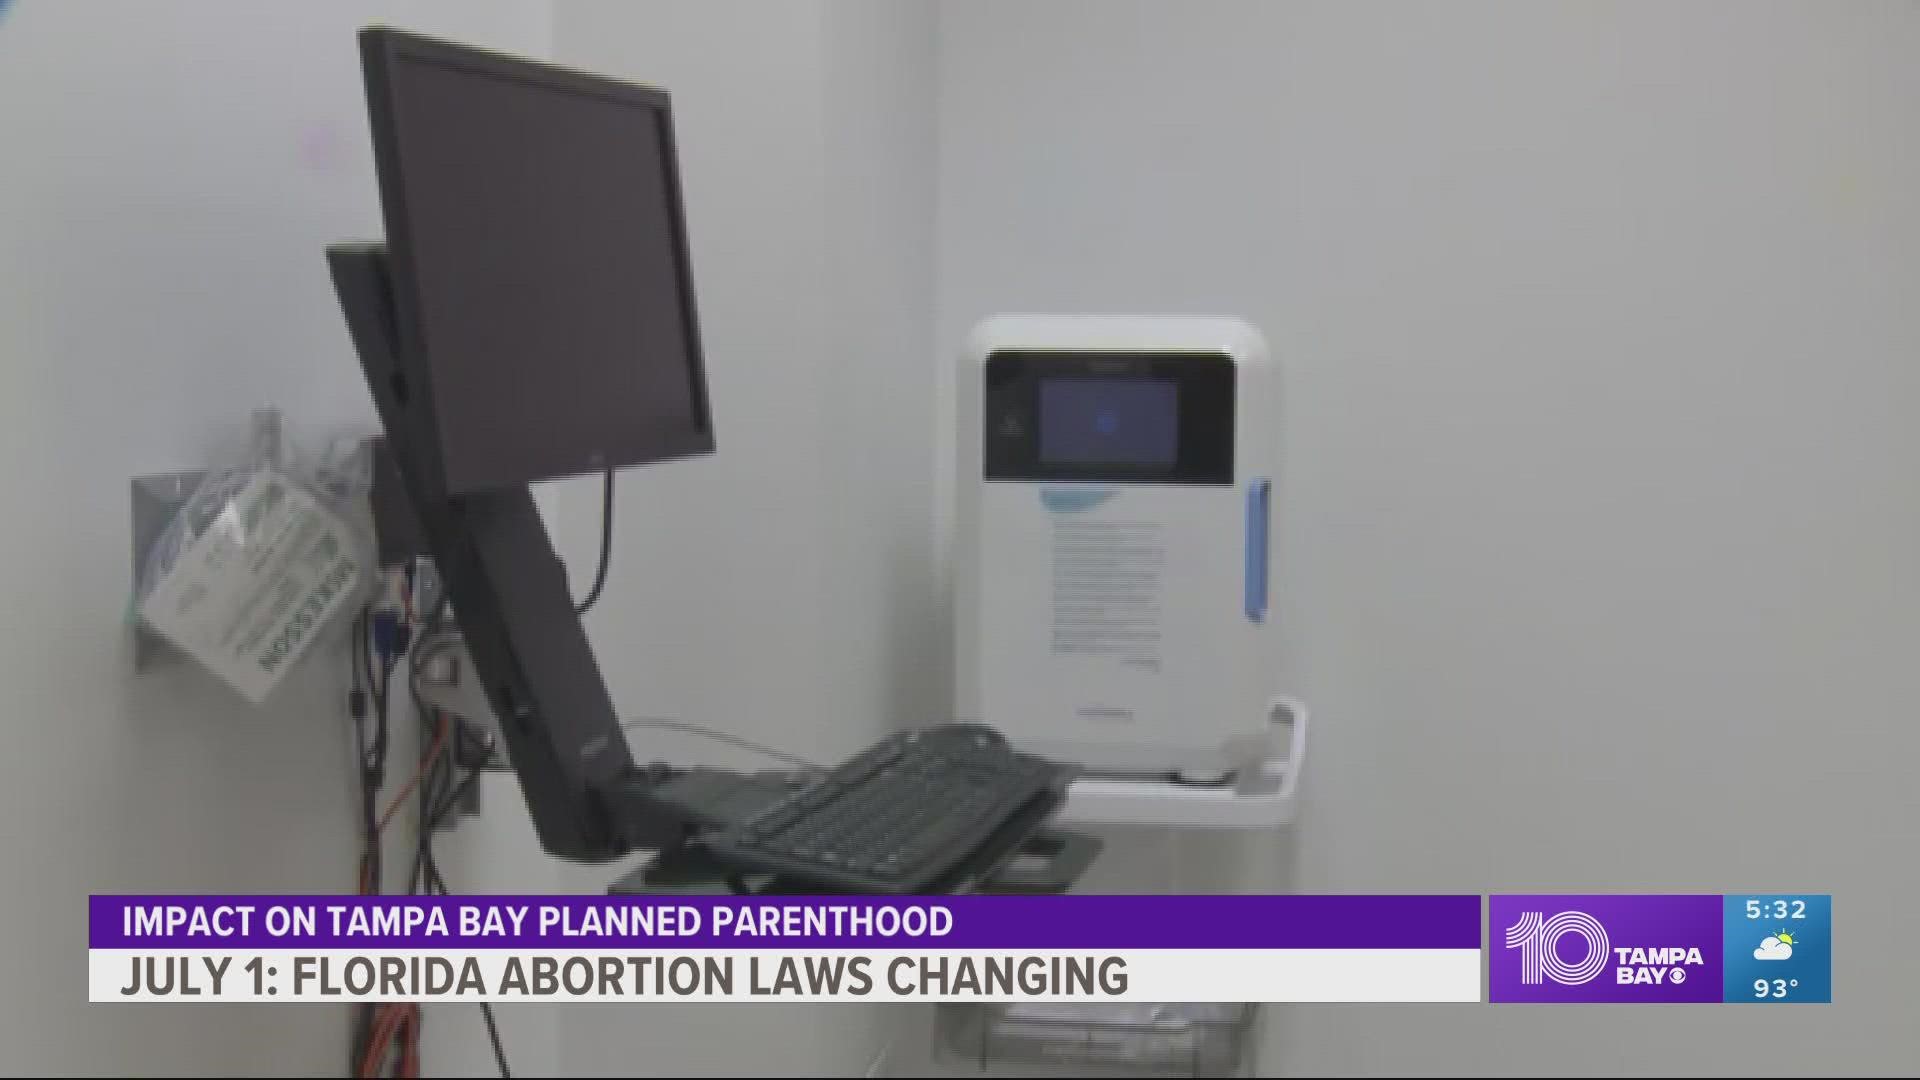 The chief medical officer for Planned Parenthood Southwest and Central Florida said patients are calling concerned if they can receive services before laws change.